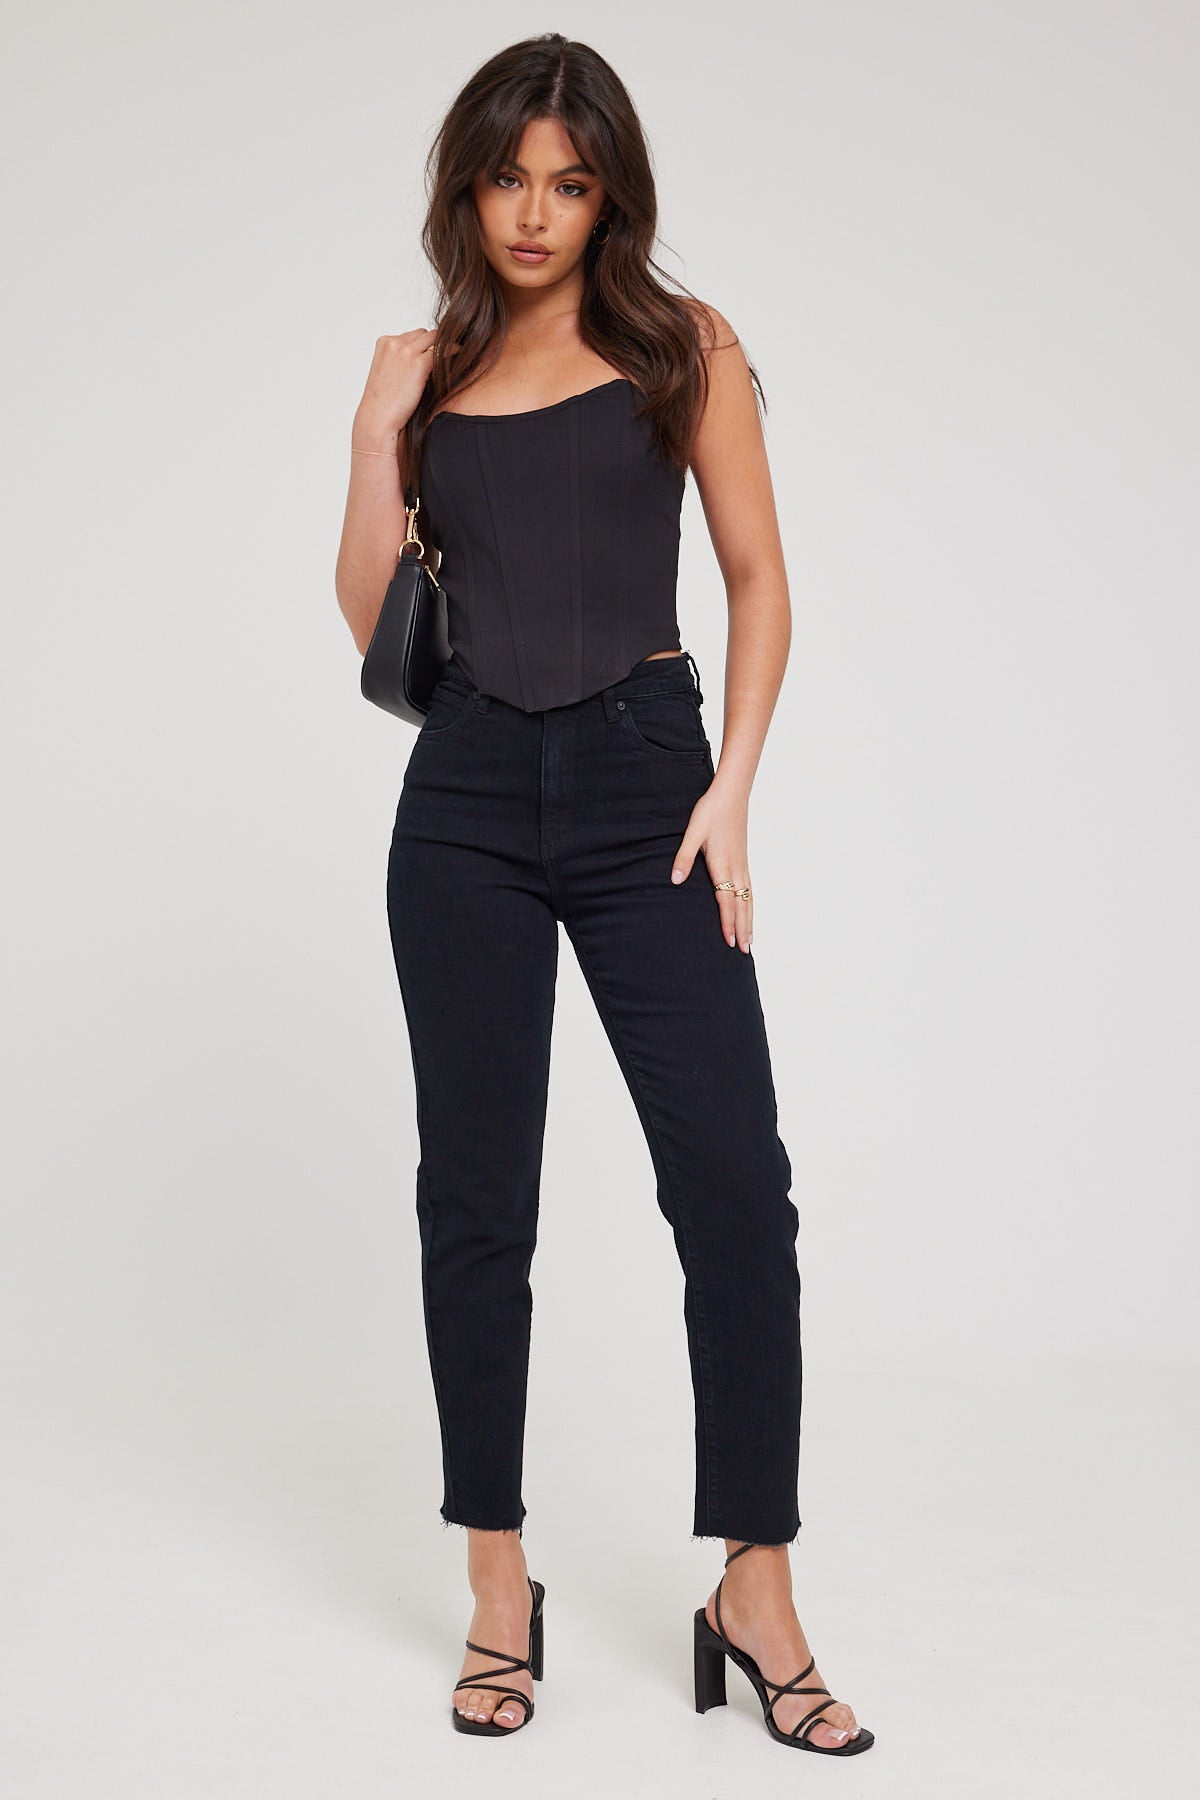 Abrand A 94 High Waisted Slim Jean Dead of Night